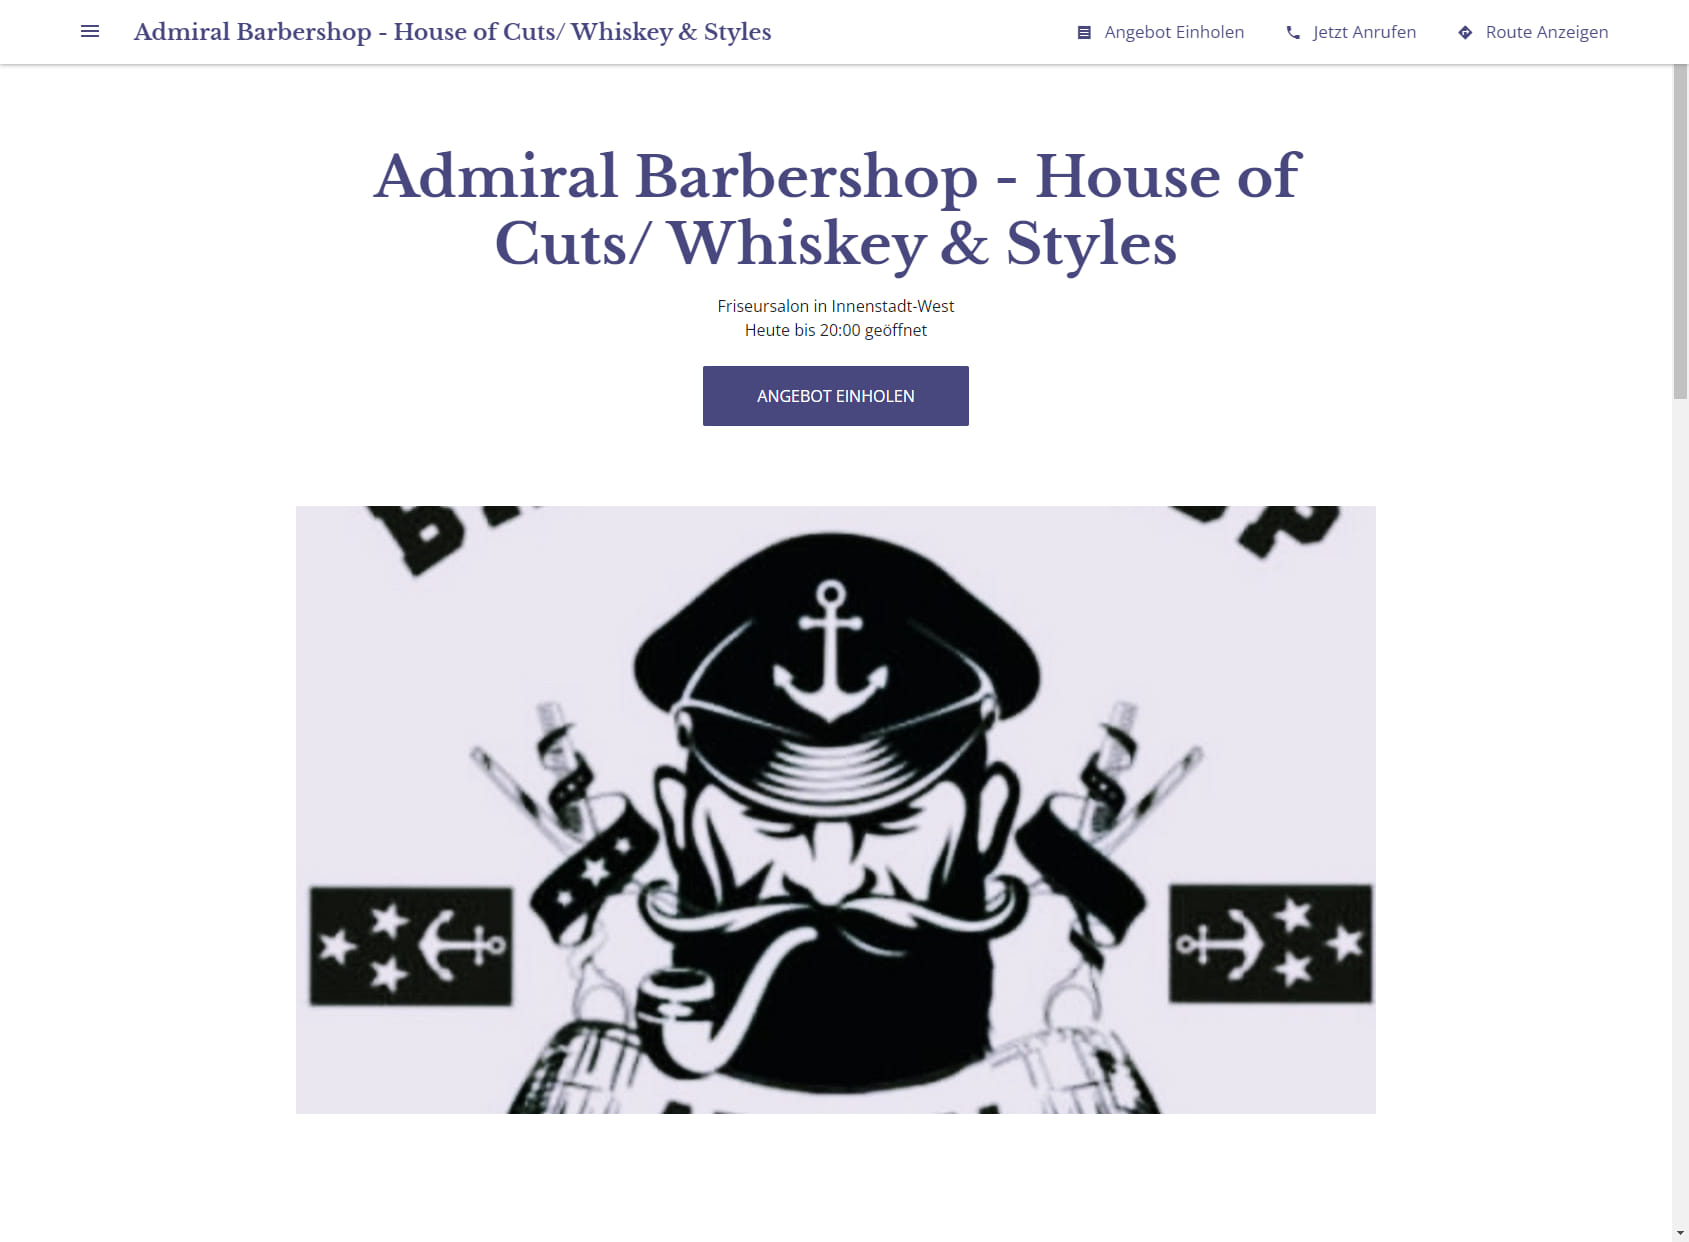 Admiral Barbershop - House of Cuts/ Whiskey & Styles